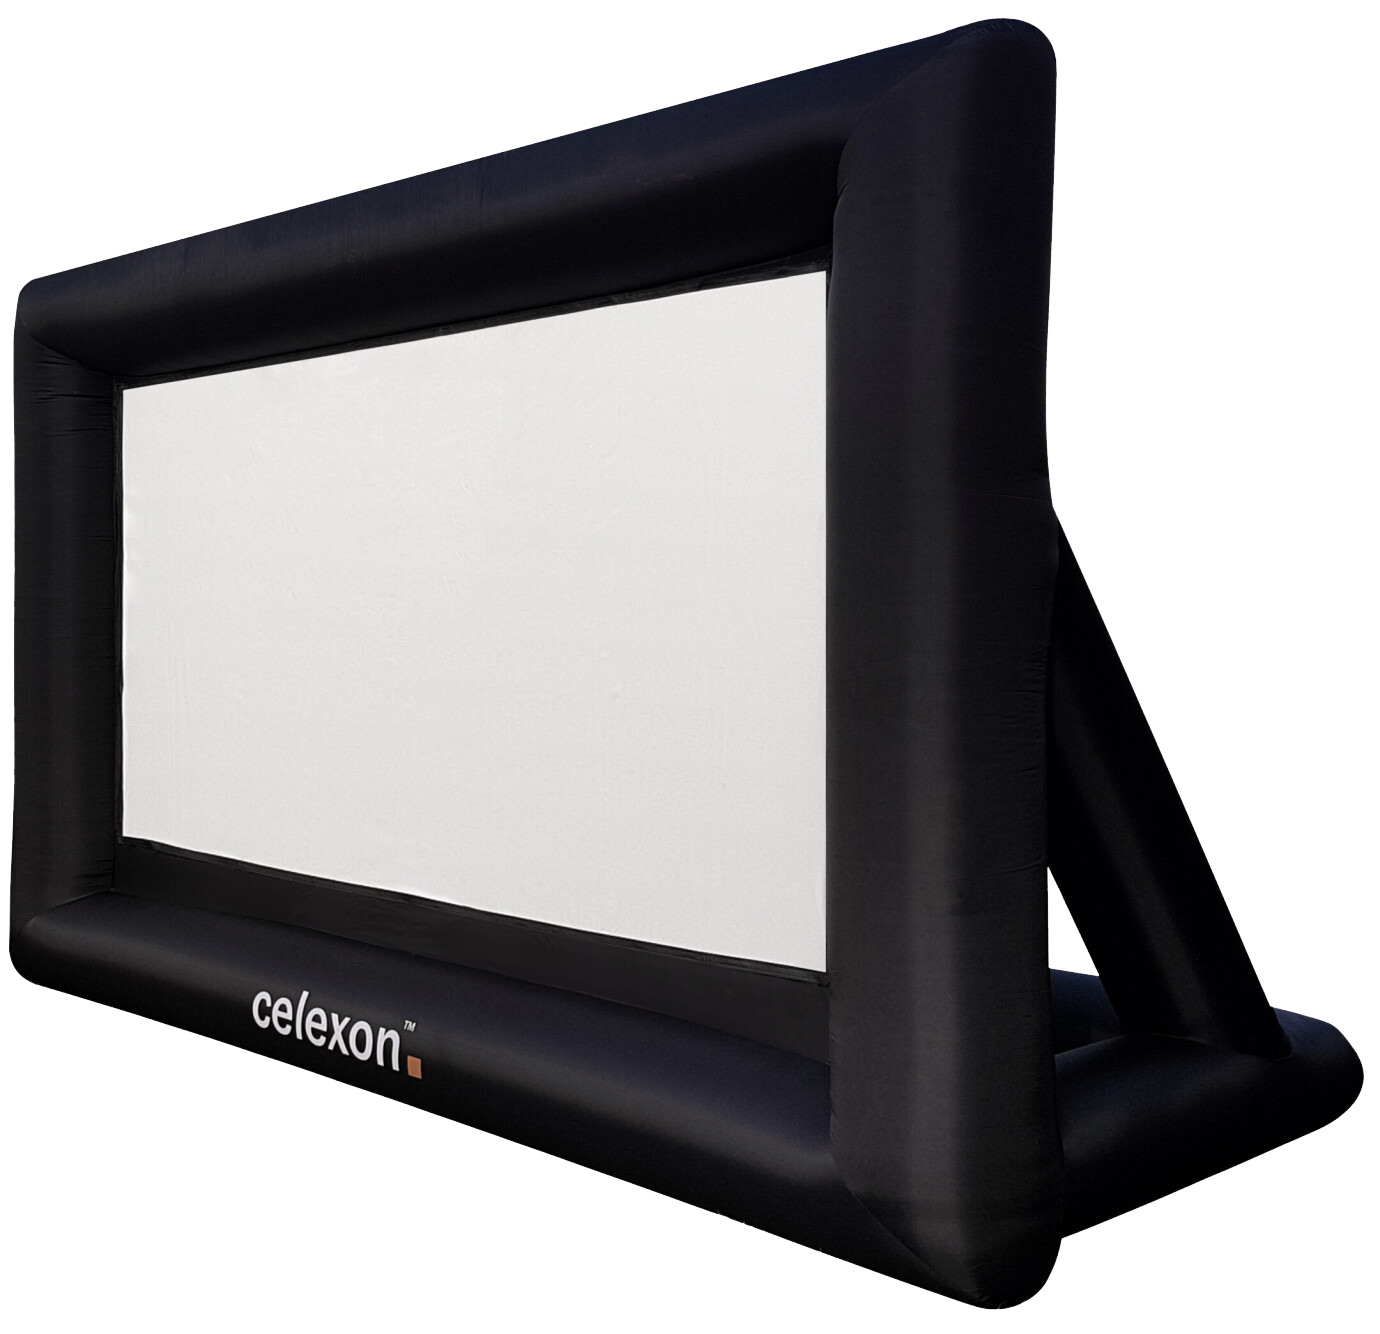 Attachment Details  Celexon-Inflatable-Outdoor-Projector-Screen-INF200